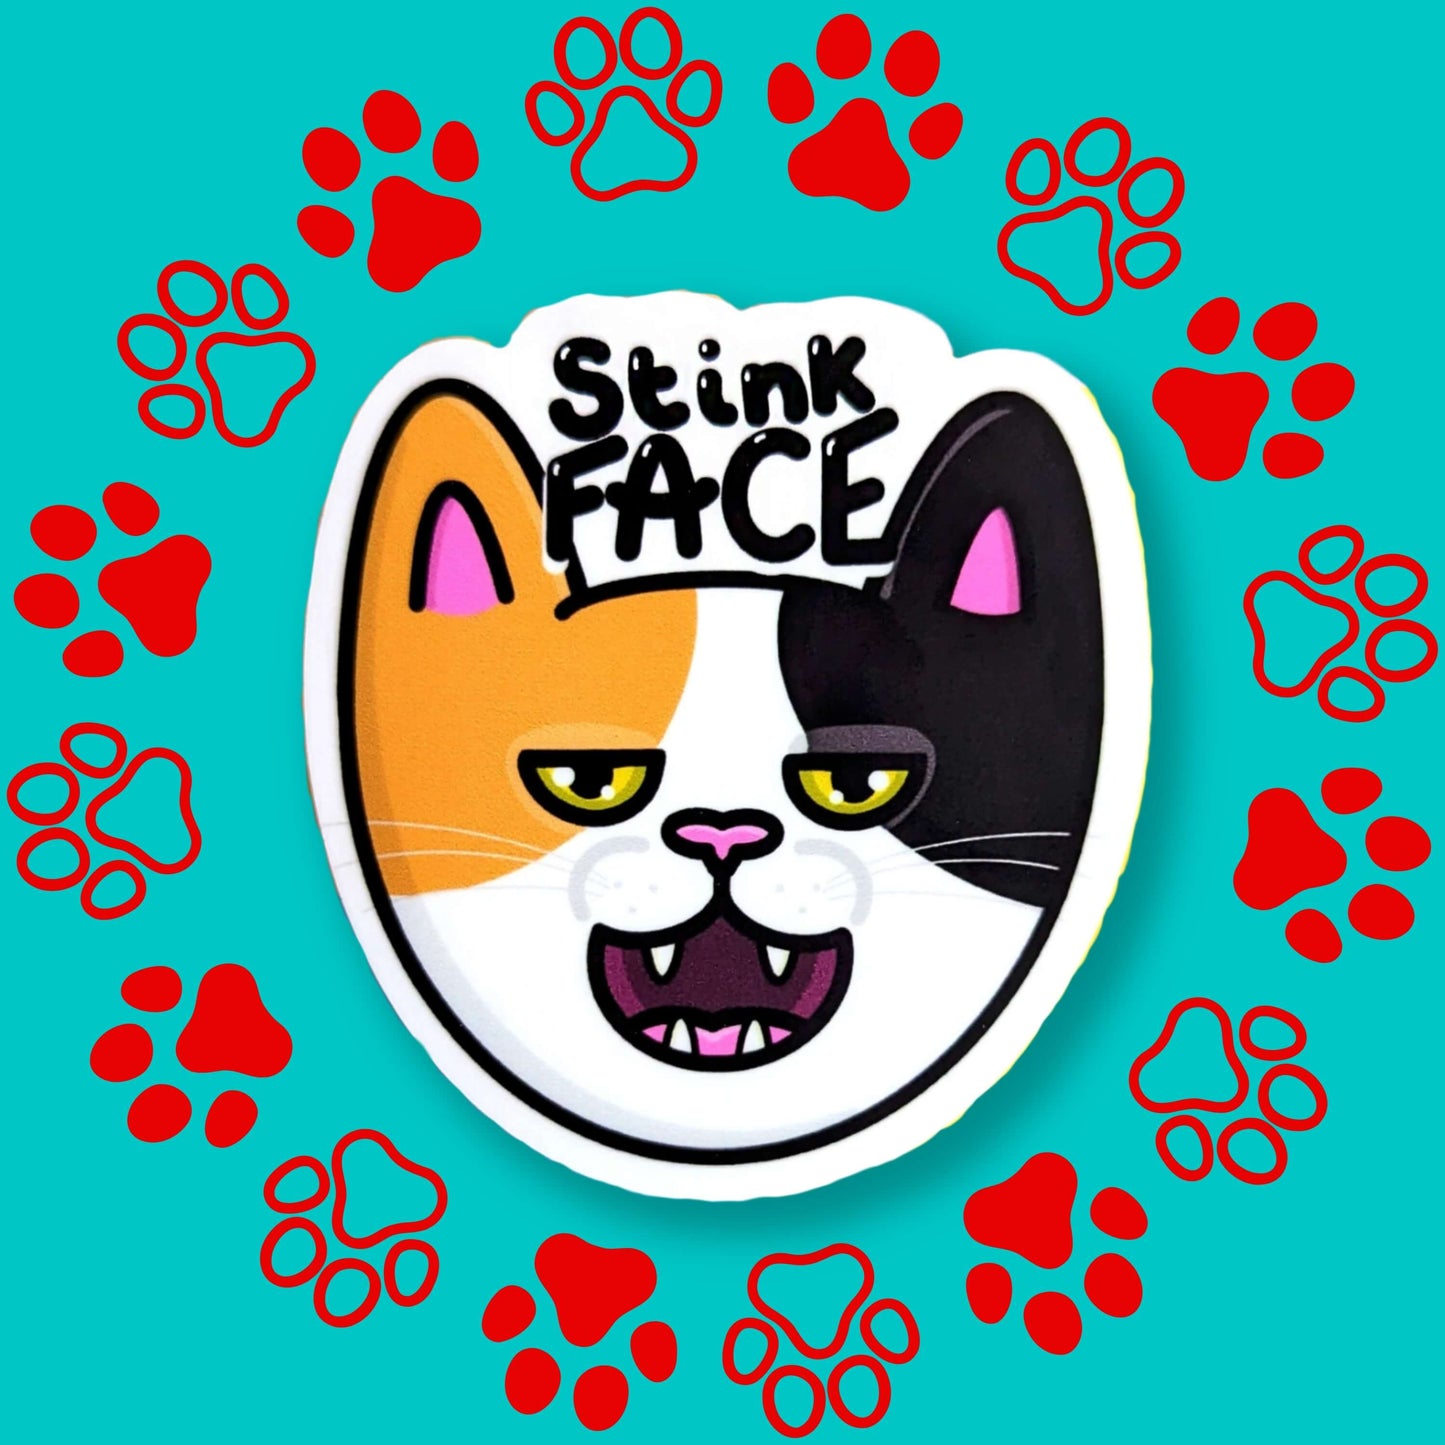 The Stink Face Cat Sticker on a red and blue paw print background. The orange and black cat head sticker is smiling with a smug look on its face and black text above reading 'stink face'. 